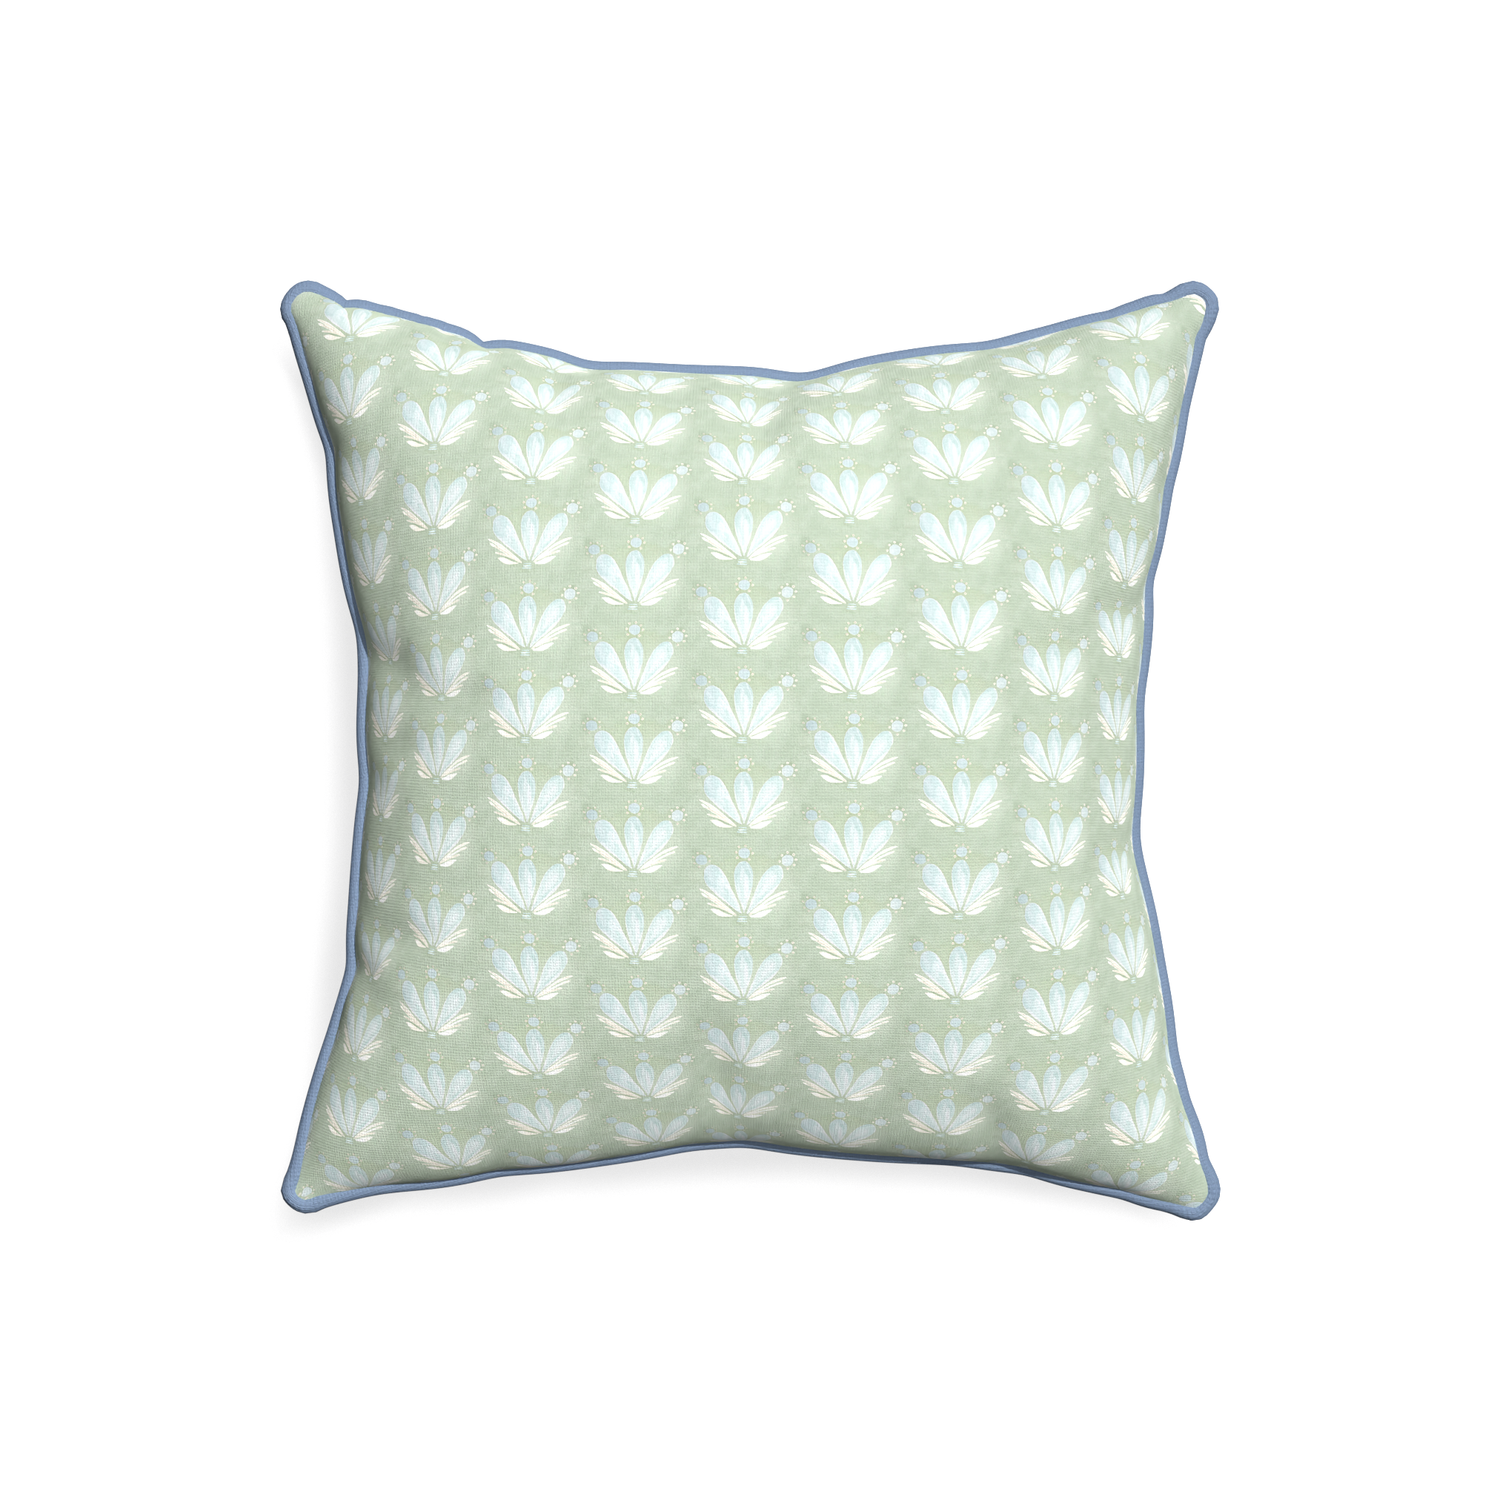 20-square serena sea salt custom pillow with sky piping on white background